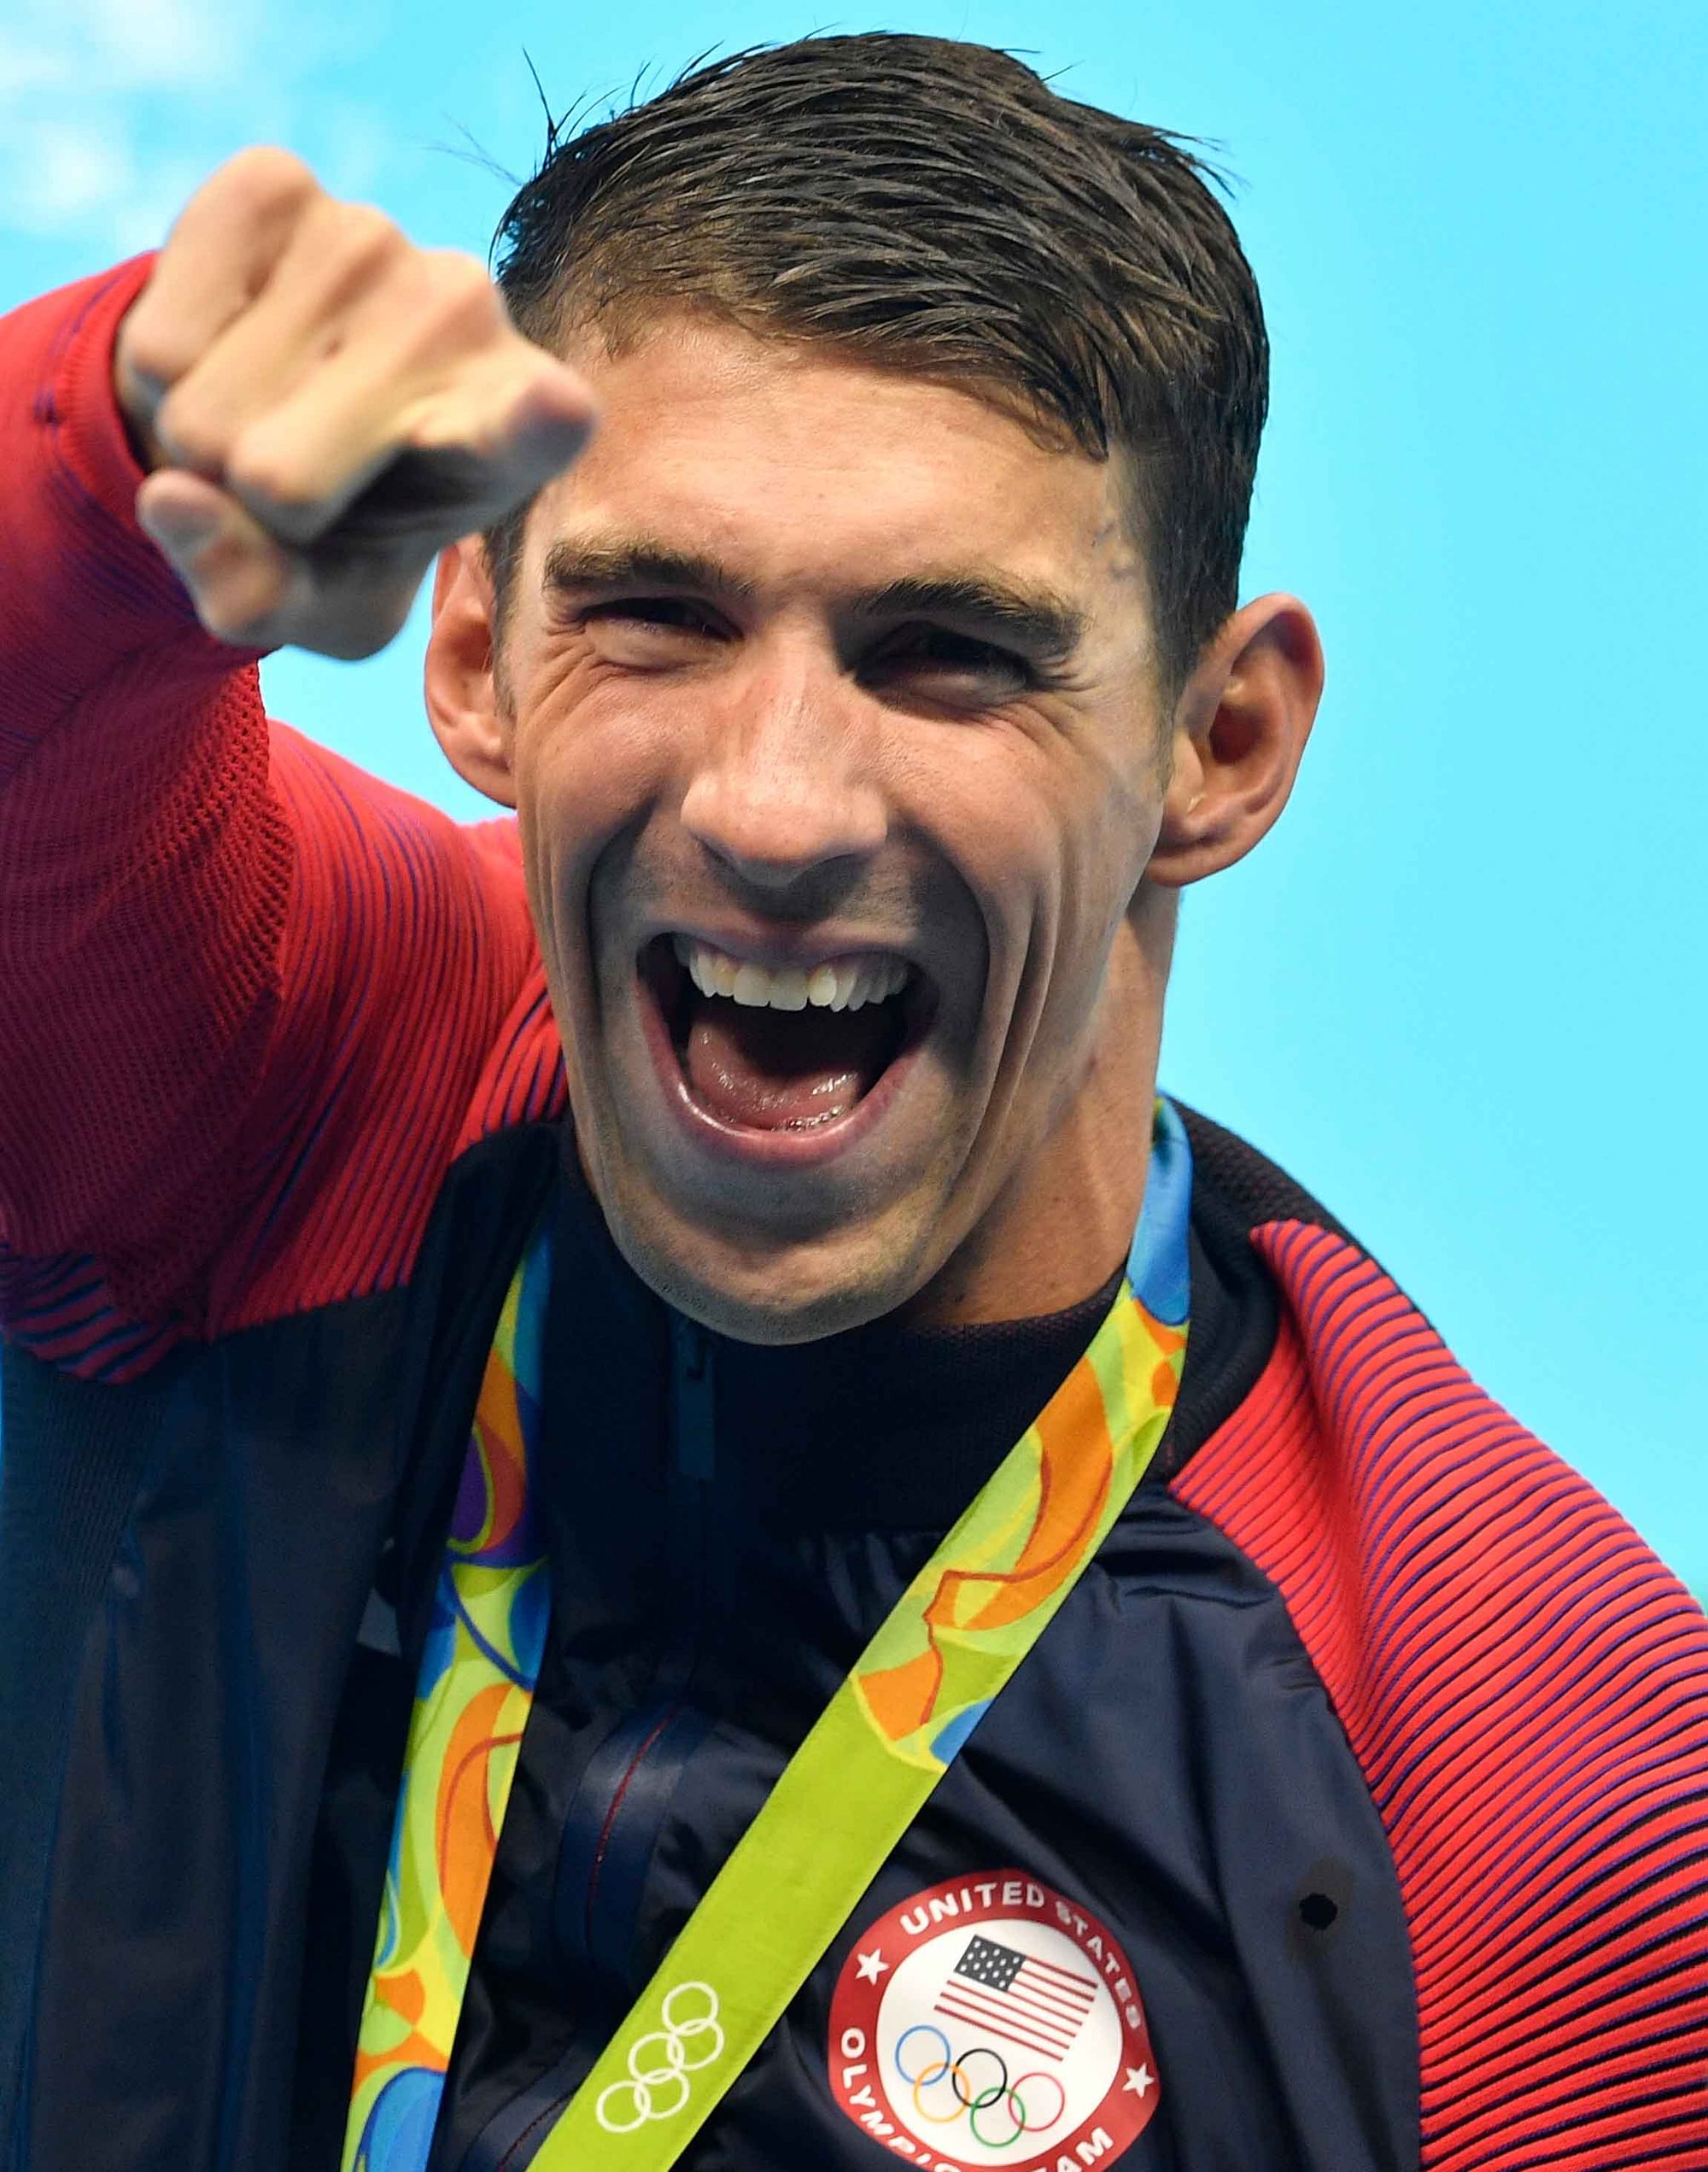 In Pics 19 Pictures of Michael Phelps Winning his 19th Gold Medal